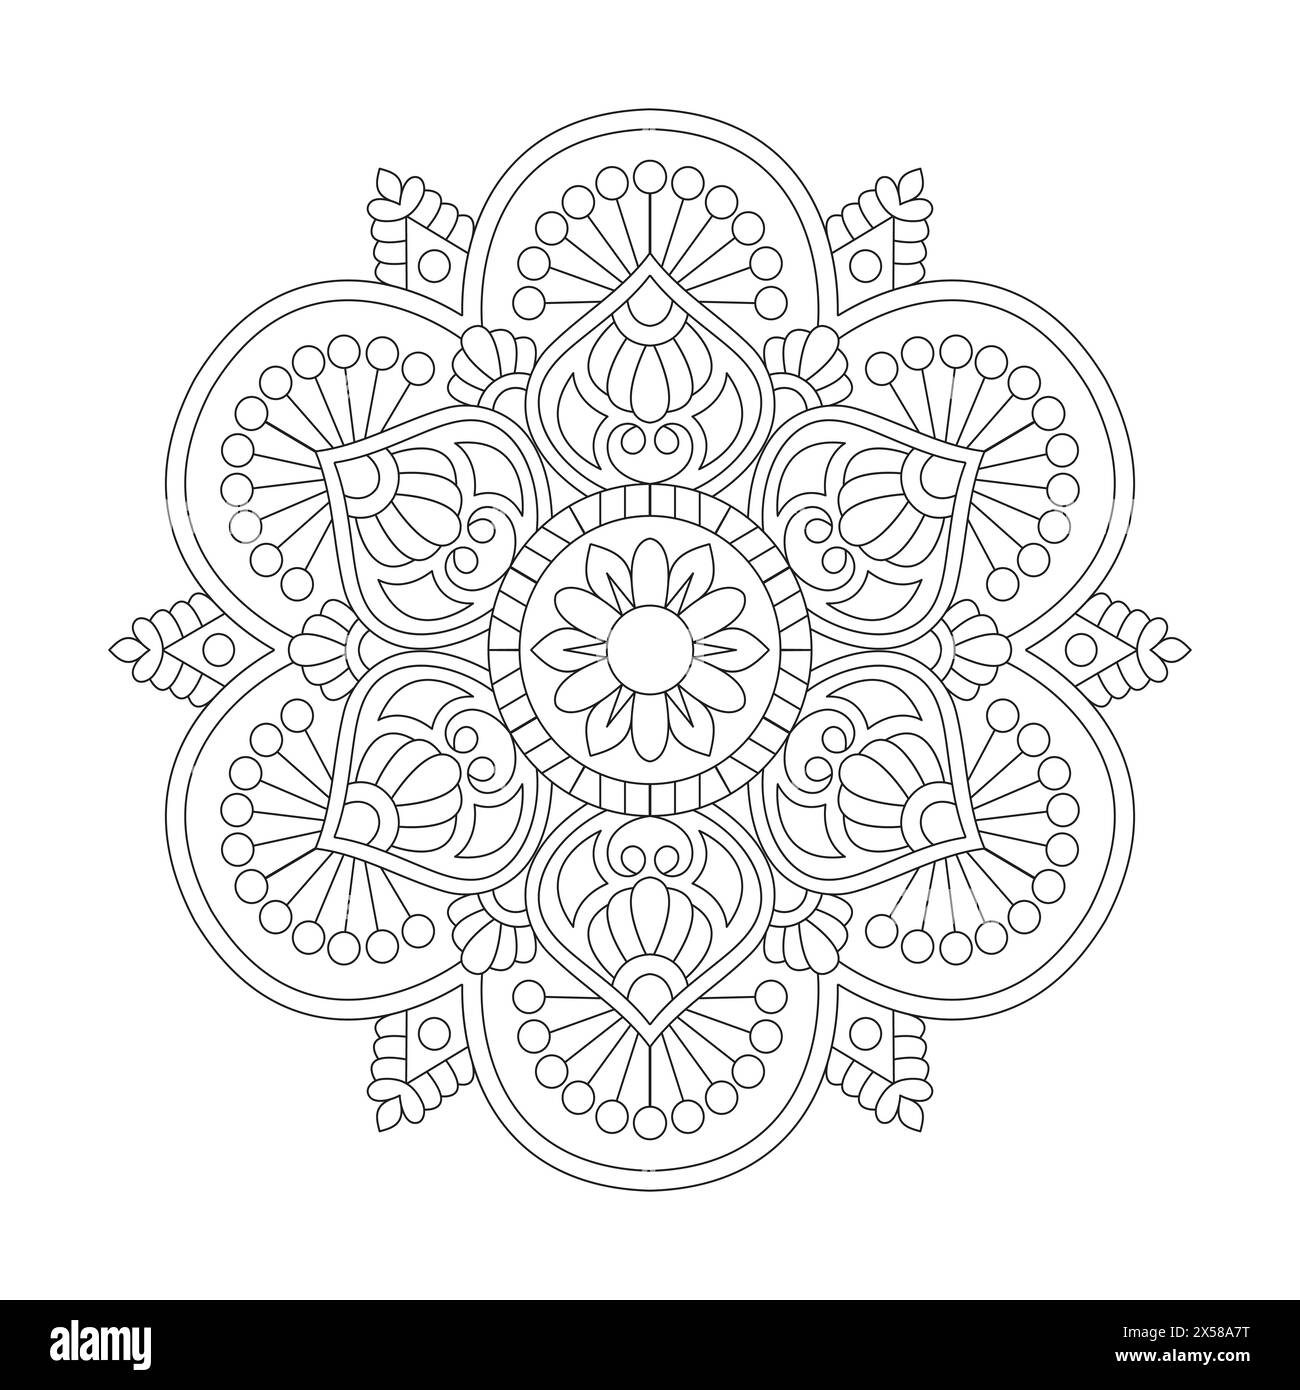 Cosmic Carousel Mandala Colouring Book Page for KDP Book Interior. Peaceful Petals, Ability to Relax, Brain Experiences, Harmonious Haven, Peaceful POR Stock Vector